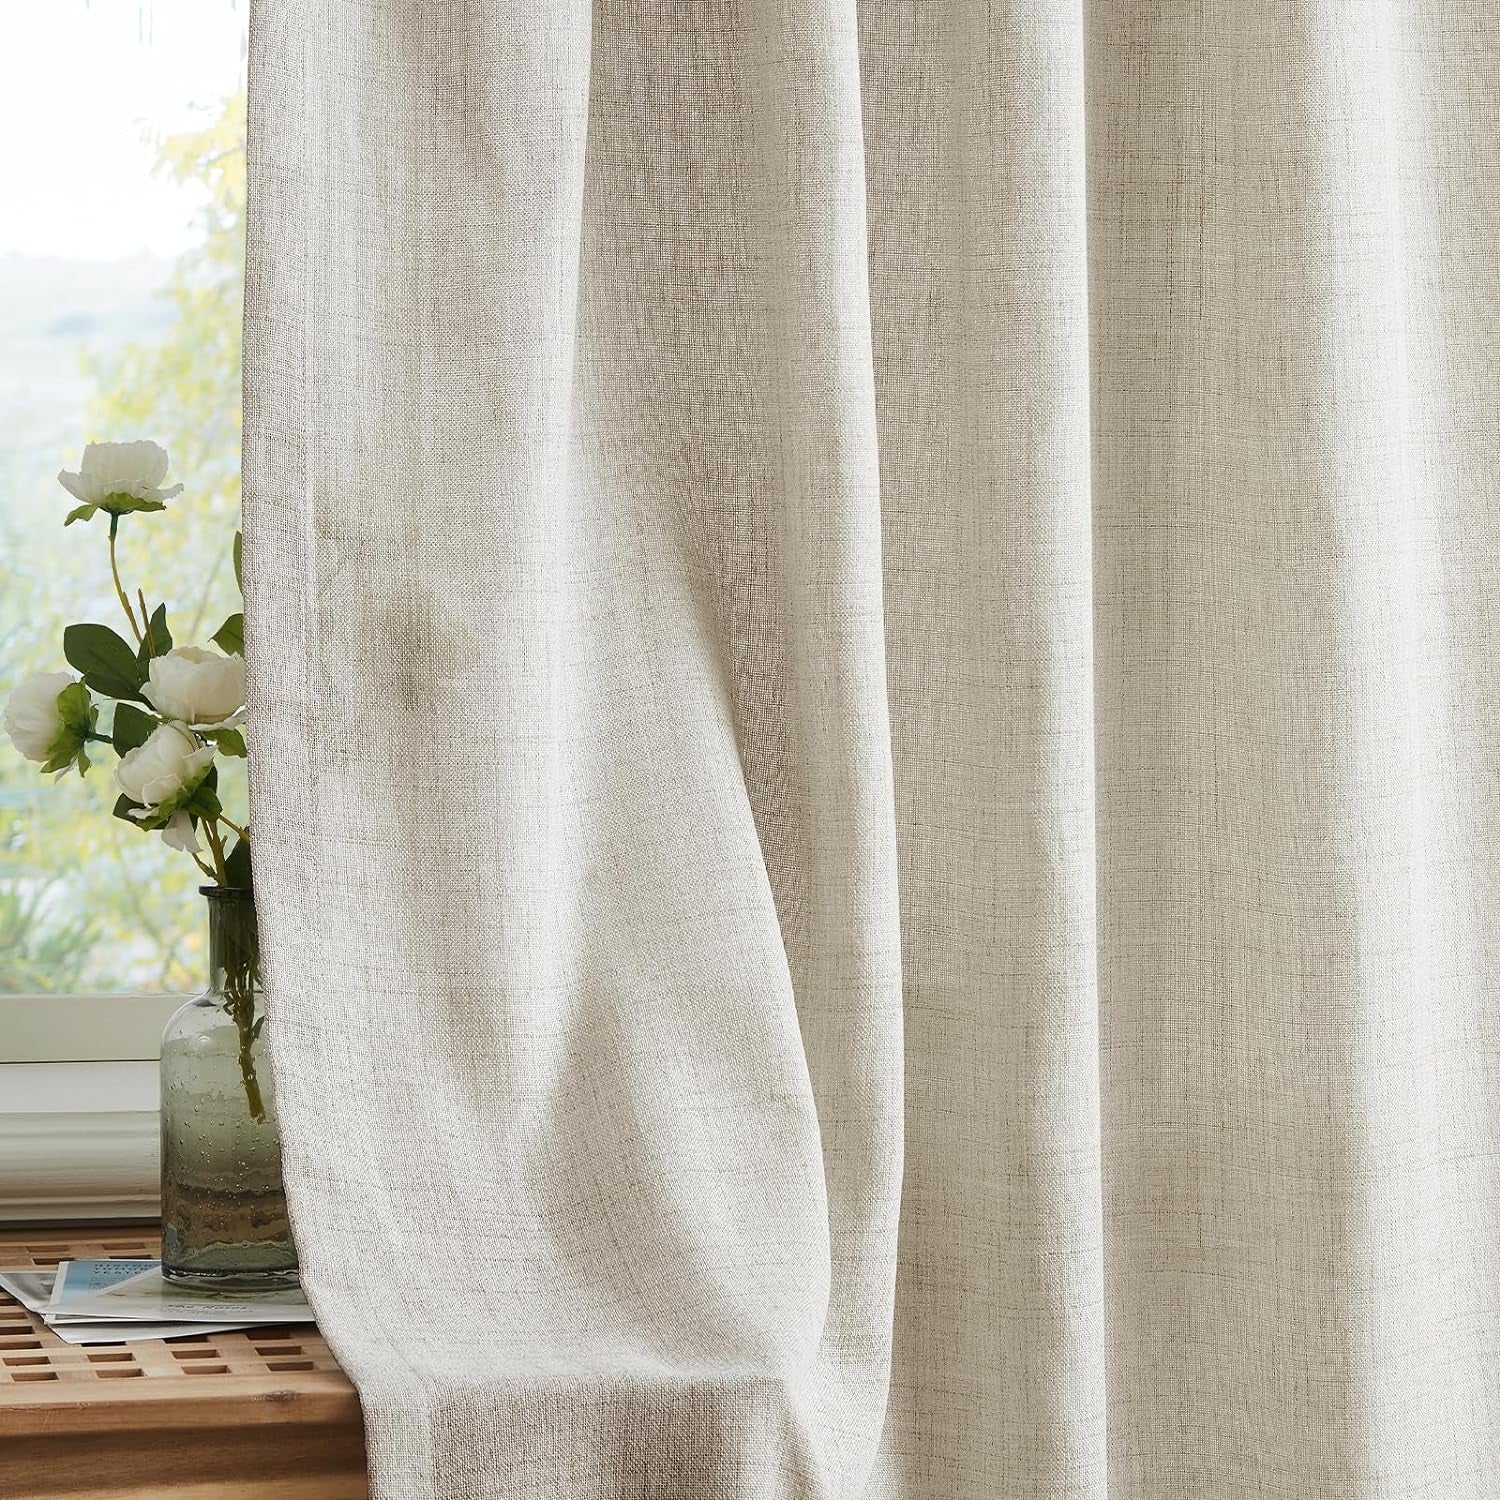 Melodieux Linen Curtains 84 Inches Long for Bedroom - Rod Pocket Burlap Linen Textured Semi Sheer Curtains Light Filtering Privacy Farmhouse Living Room Drapes (Set of 2, 52Inch X 84Inch, Beige)  Melodieux   